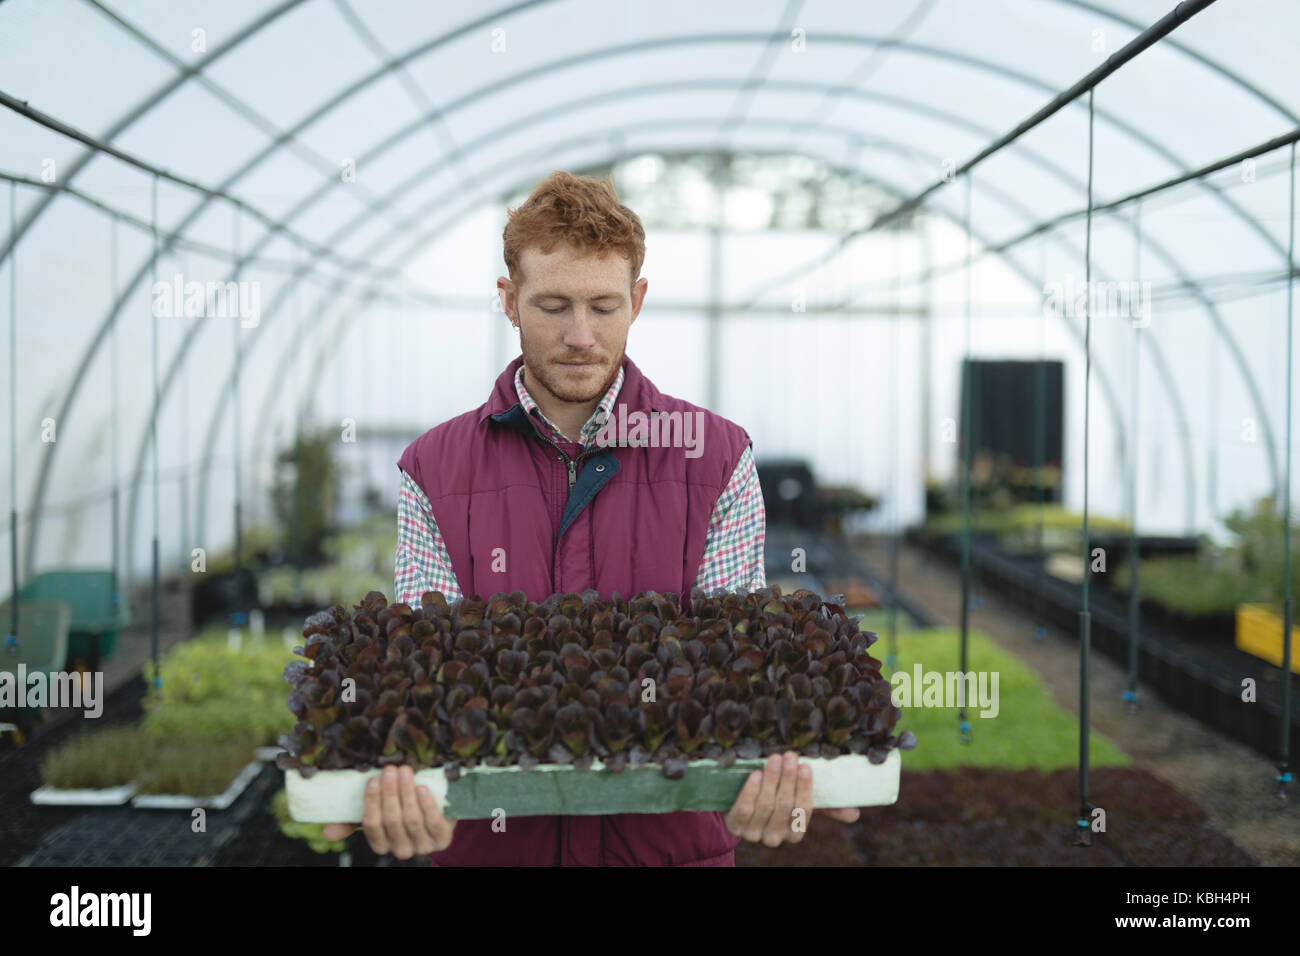 Man holding fresh leafy vegetable in greenhouse Stock Photo